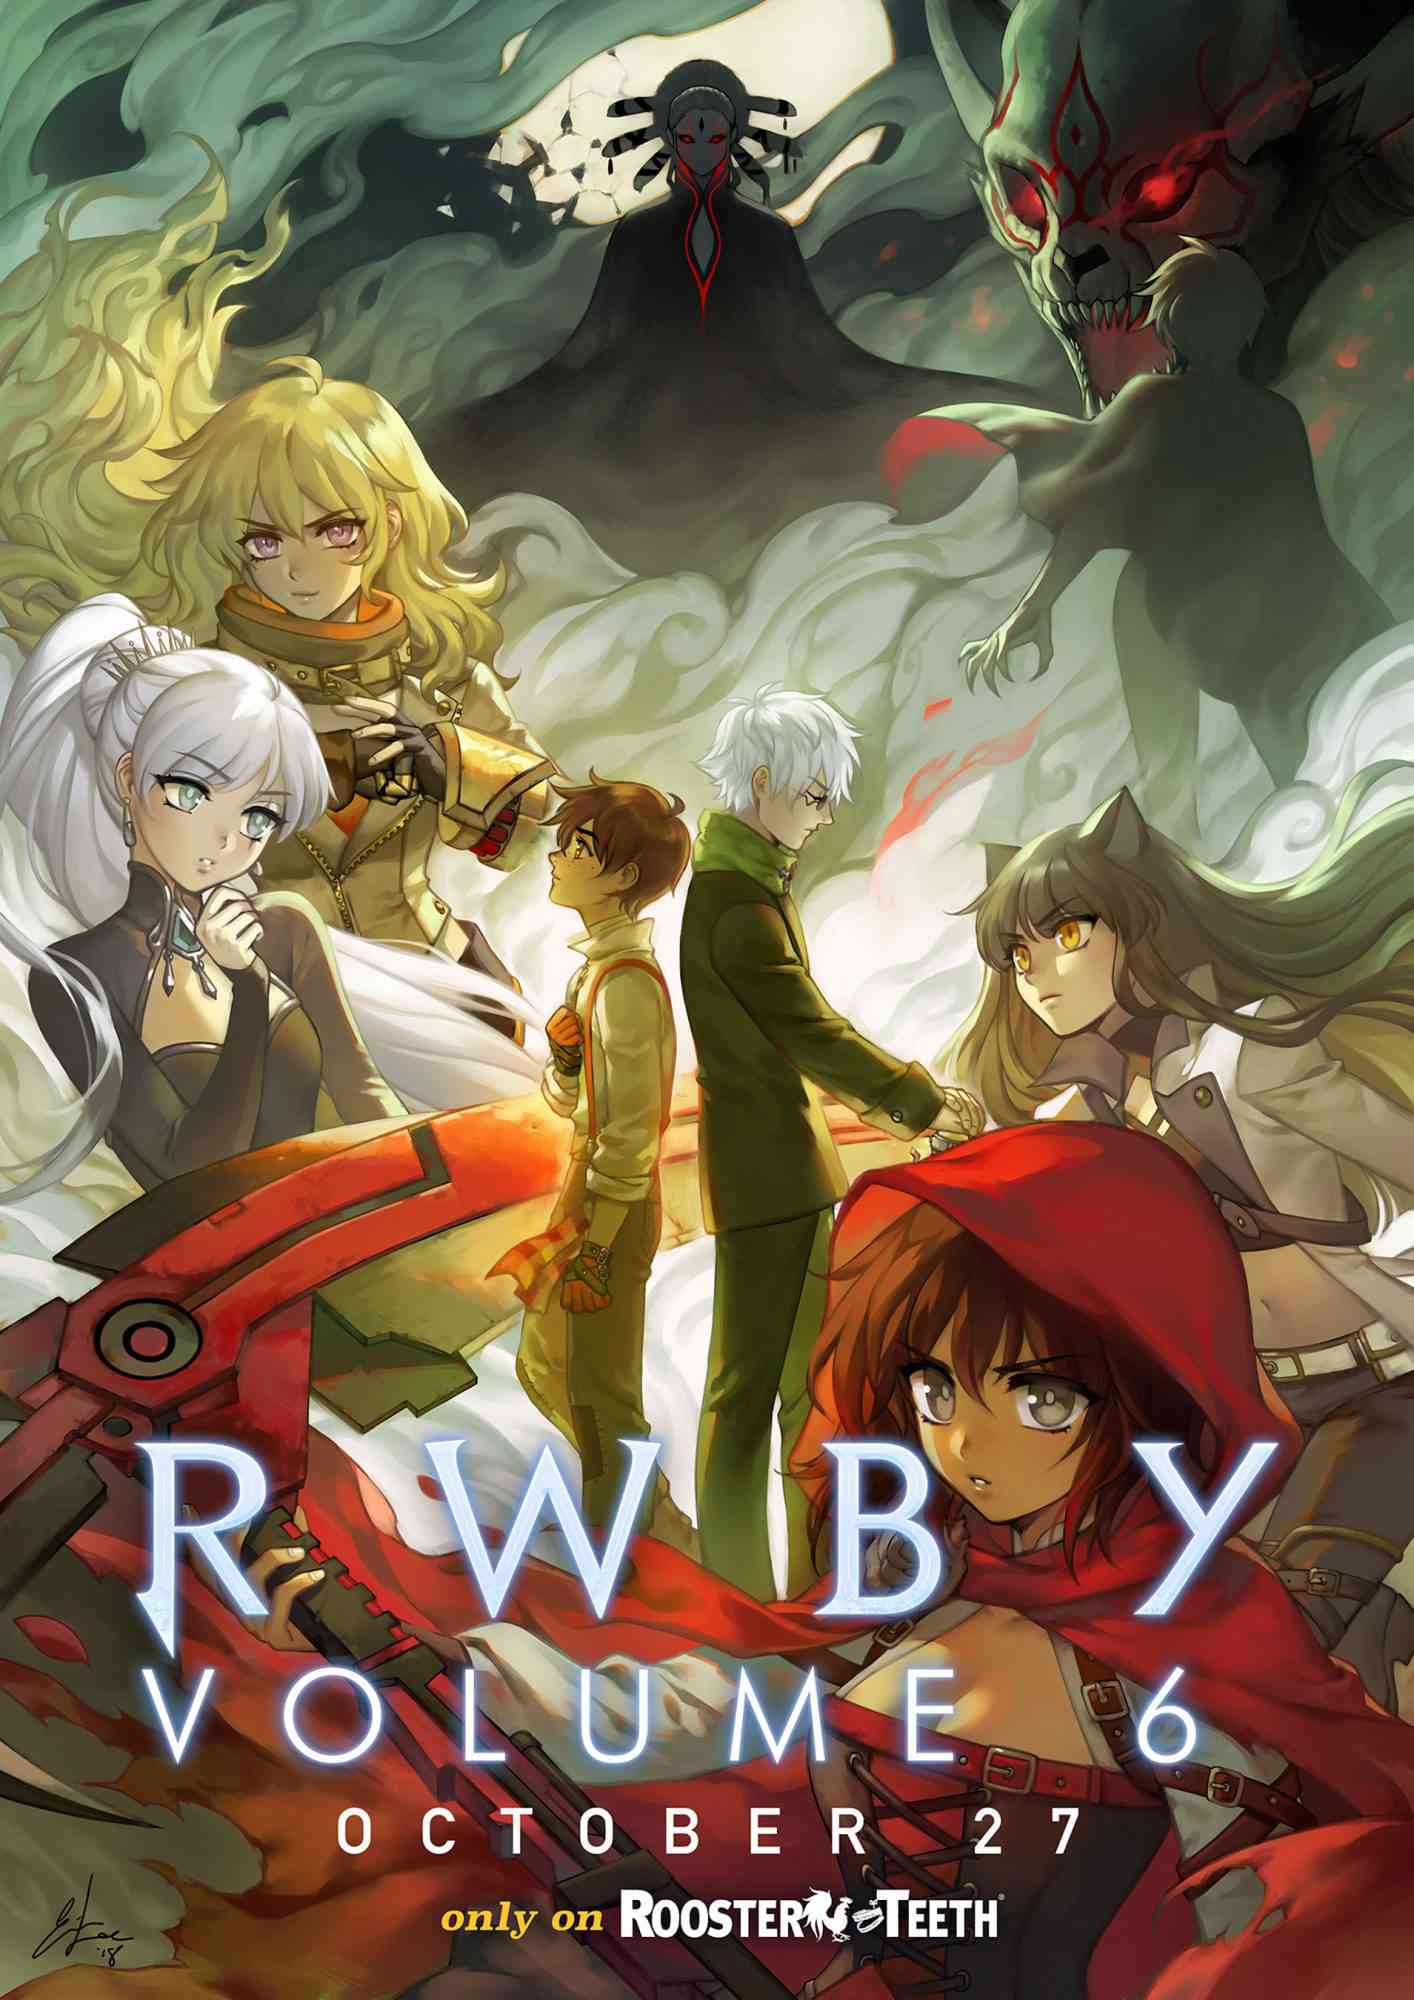 Rwby Volume 6 Gets Teased In Exclusive Poster For Animated Show Ew Com